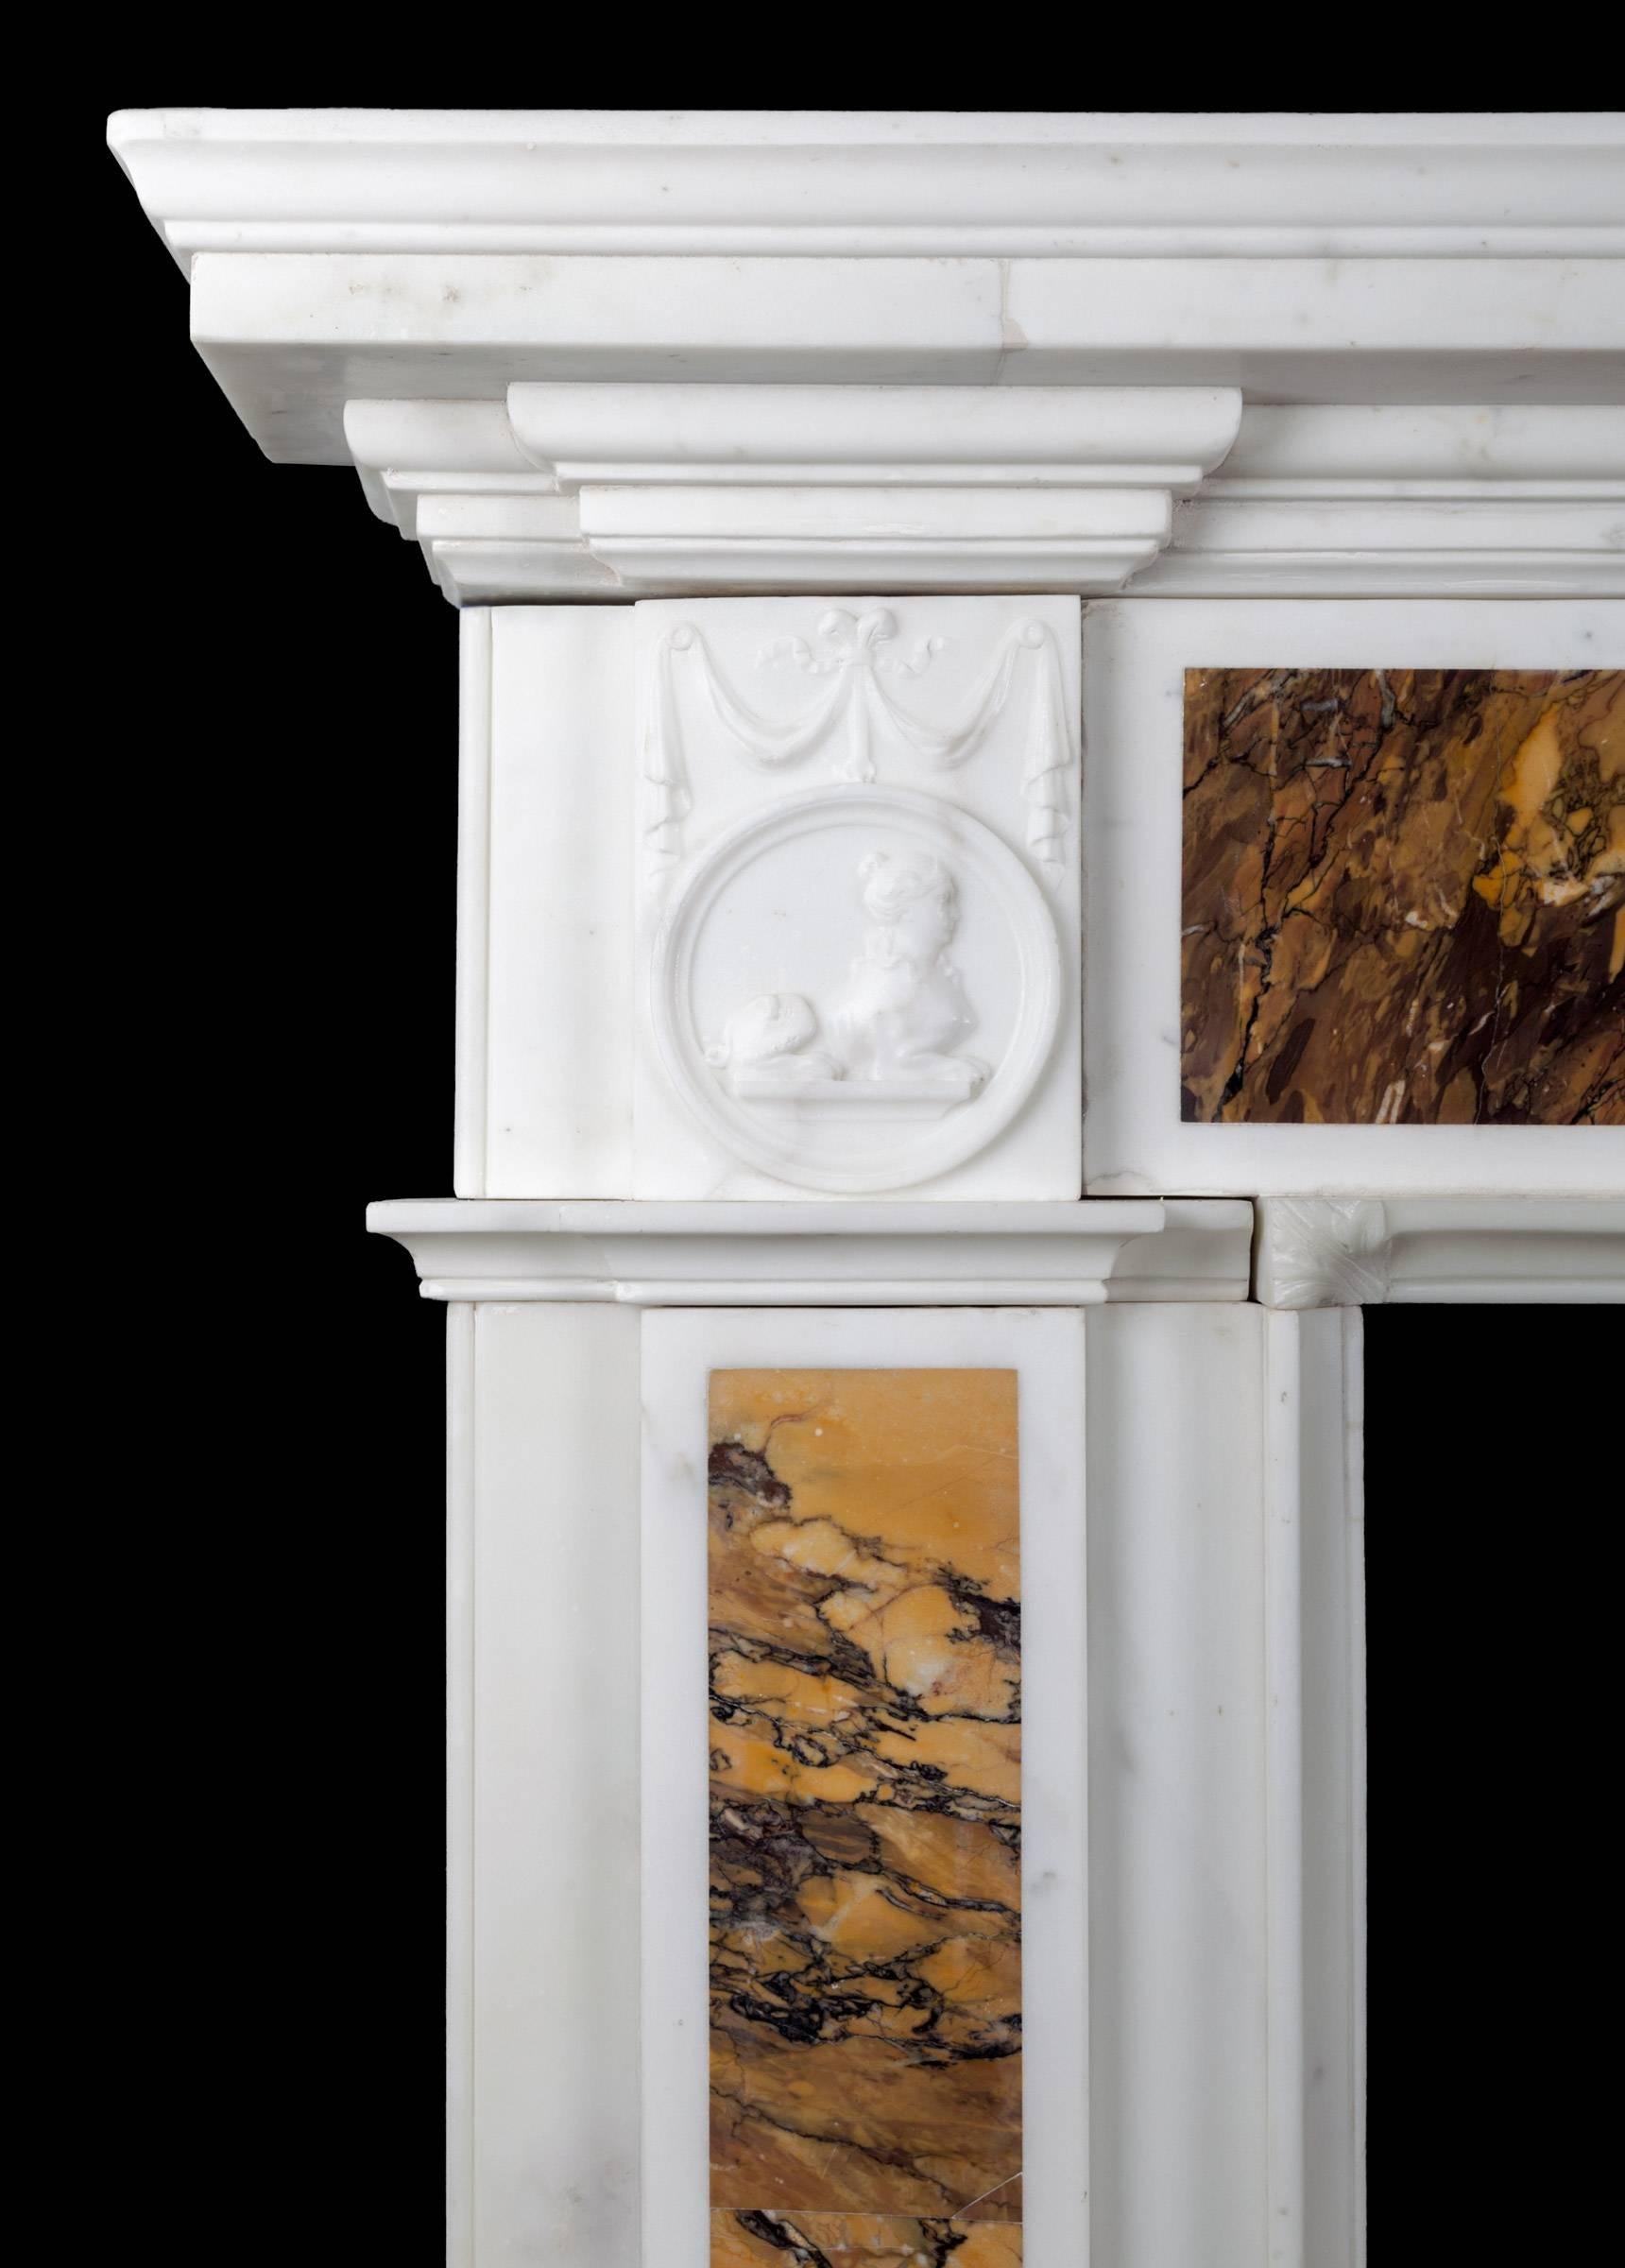 Superb quality Irish George III neoclassical marble fireplace. Made from pure white Italian statuary Carrara marble, inlaid with richly coloured convent Sienna marble. The corner blocks of circular medallions with sphinxes in the centres, these